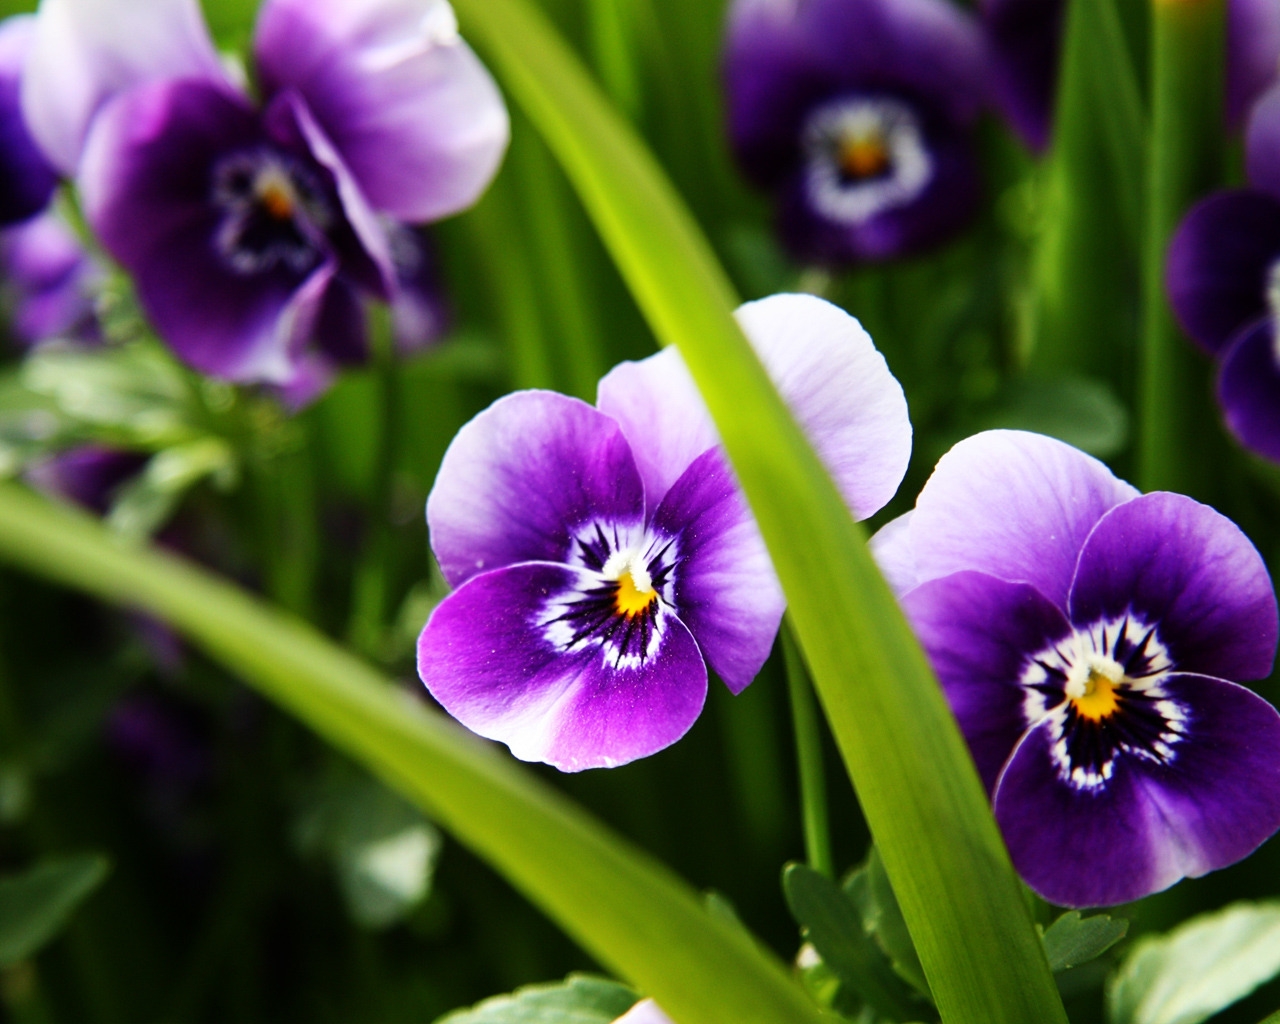 Purple Pansies for 1280 x 1024 resolution